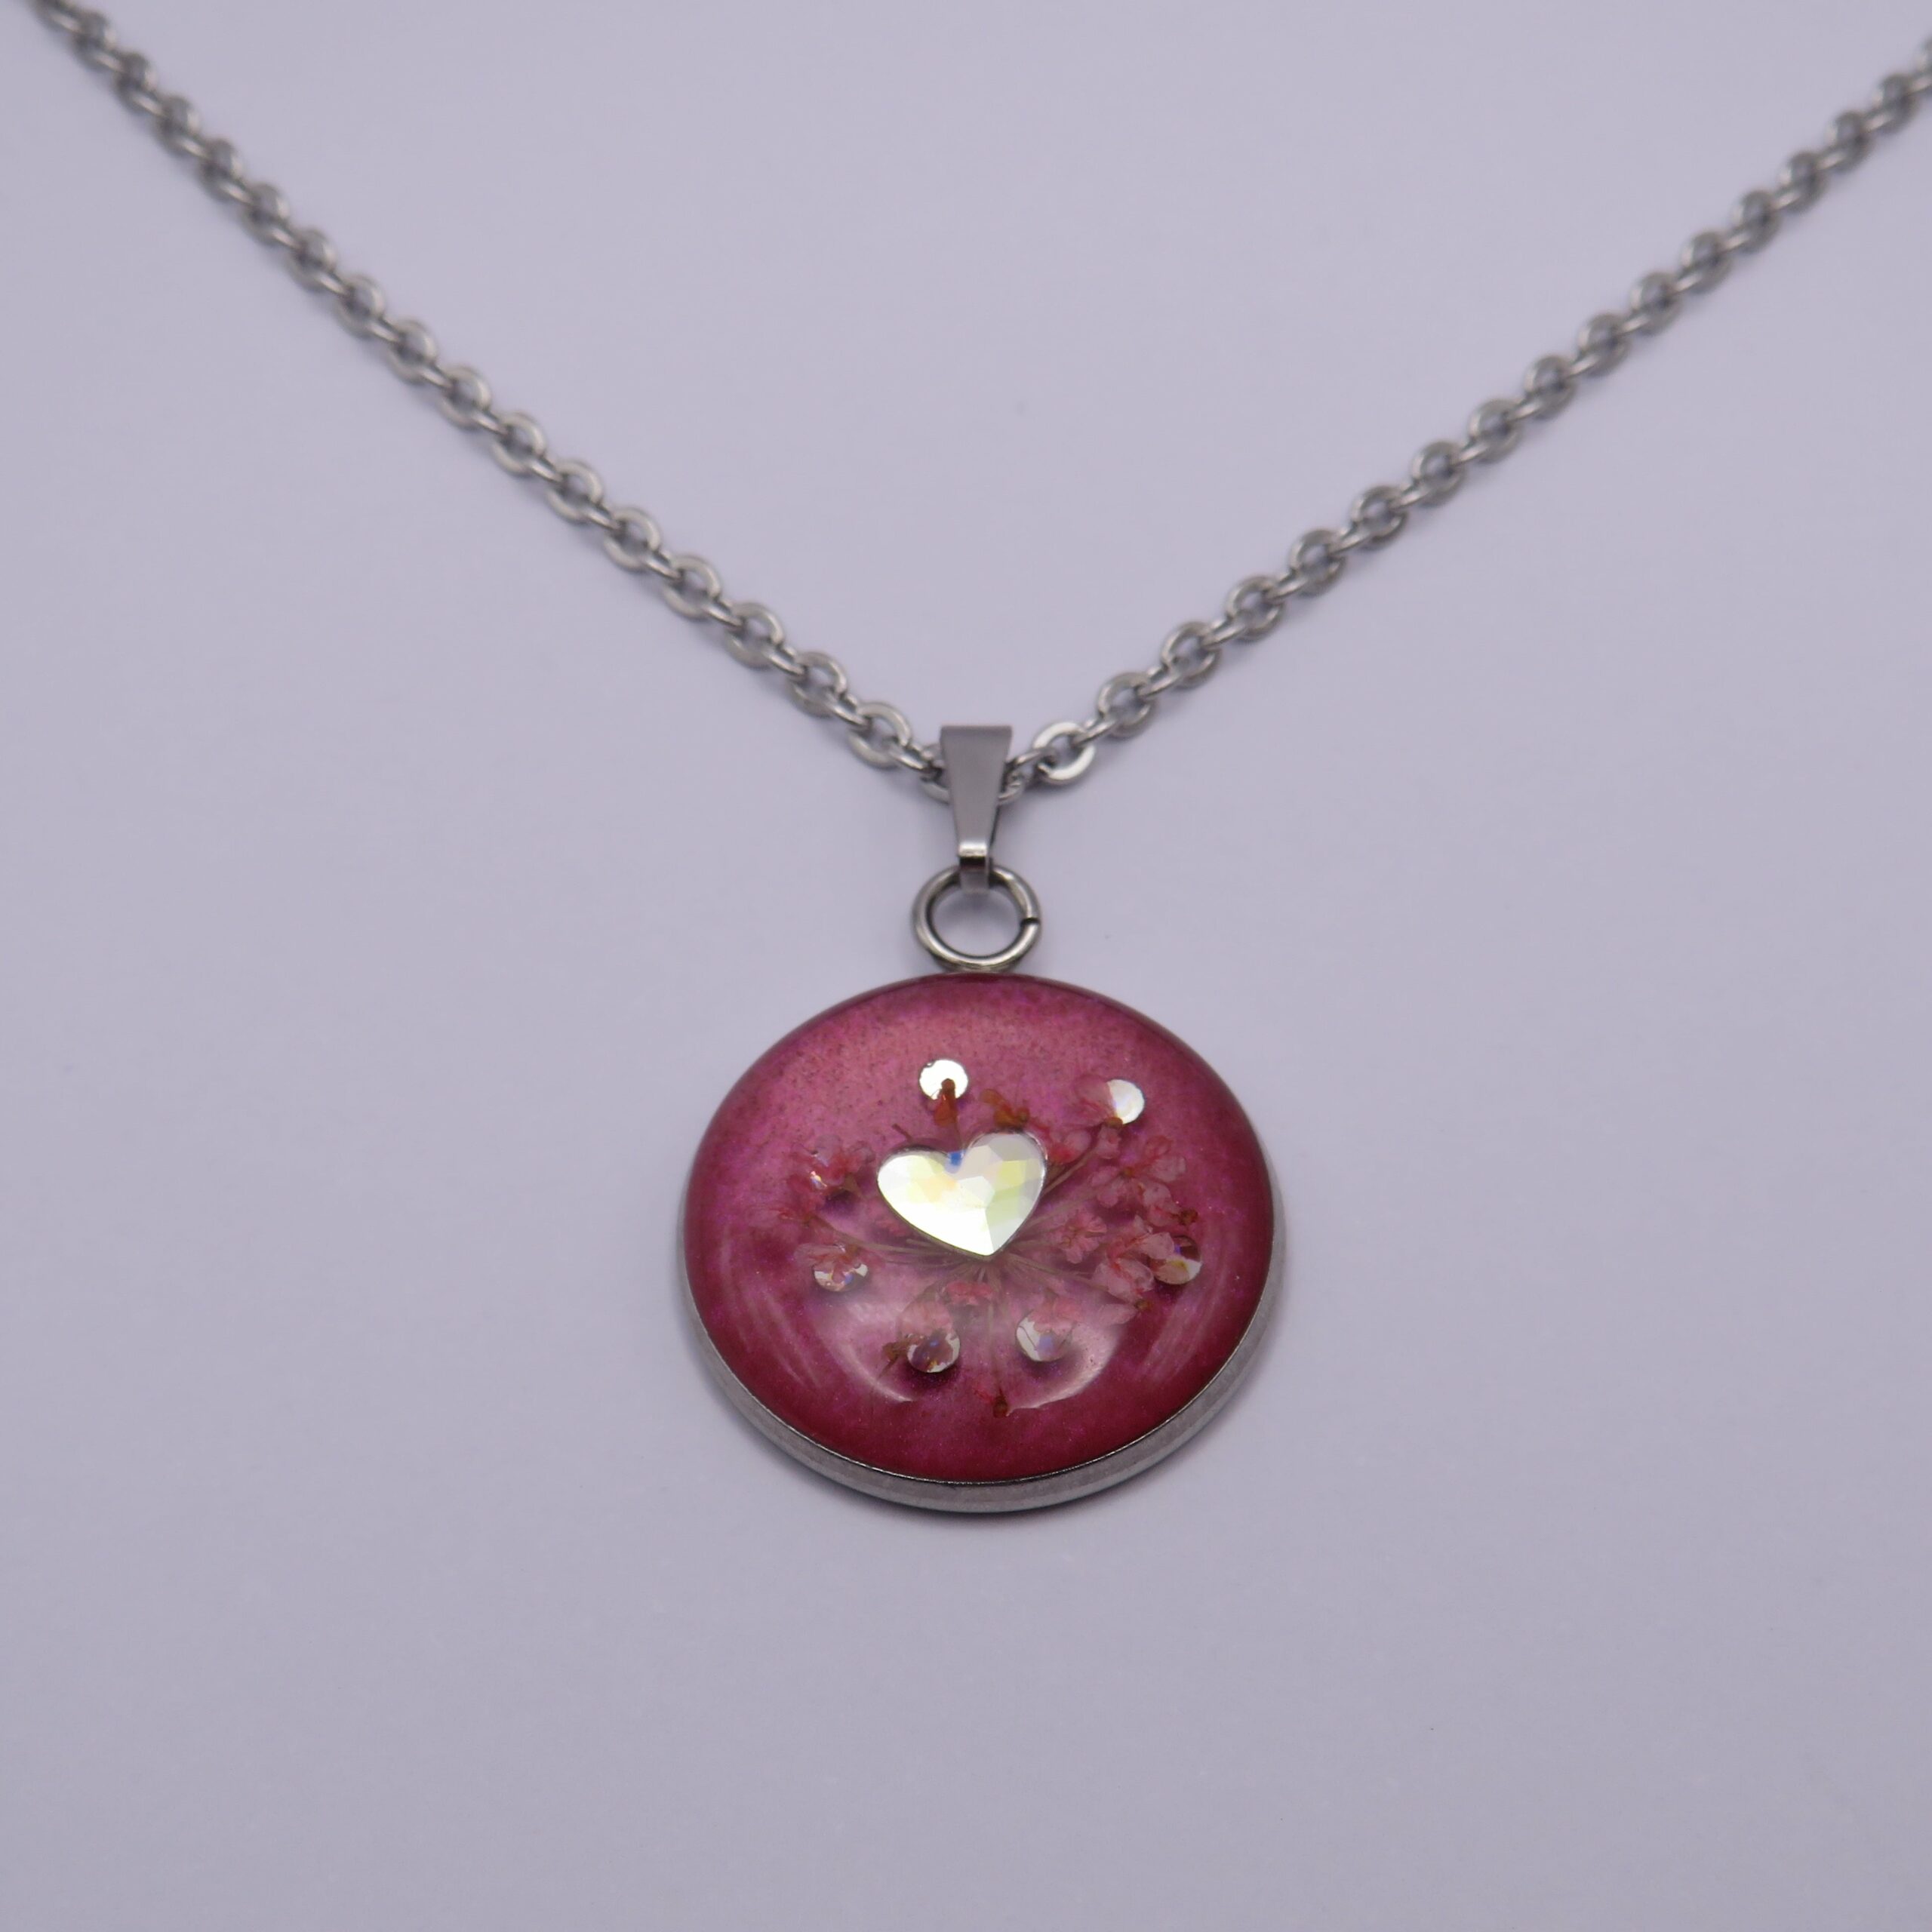 Stainless Steel Rhinestones Pink Cabochon Pendant Necklace